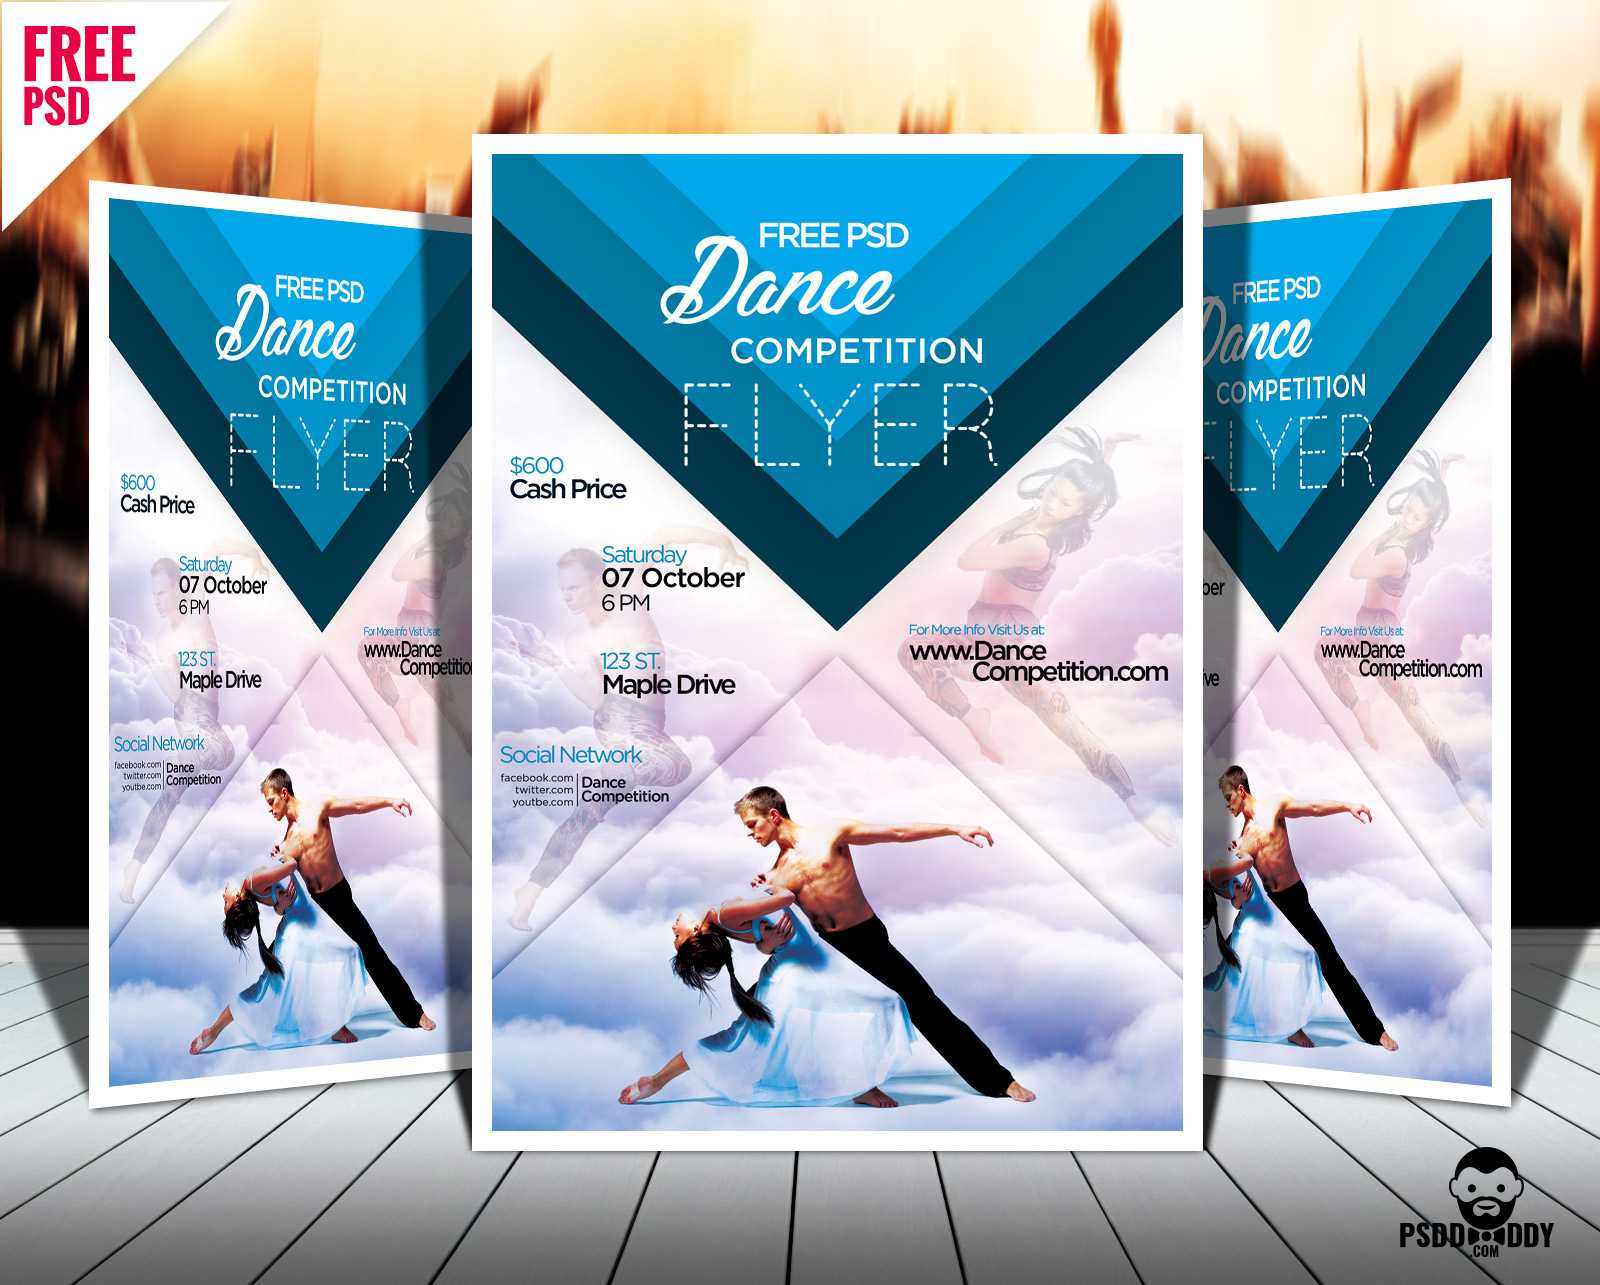 Download] Dance Competition Flyer Psd | Psddaddy Within Flyer Maker Template Free